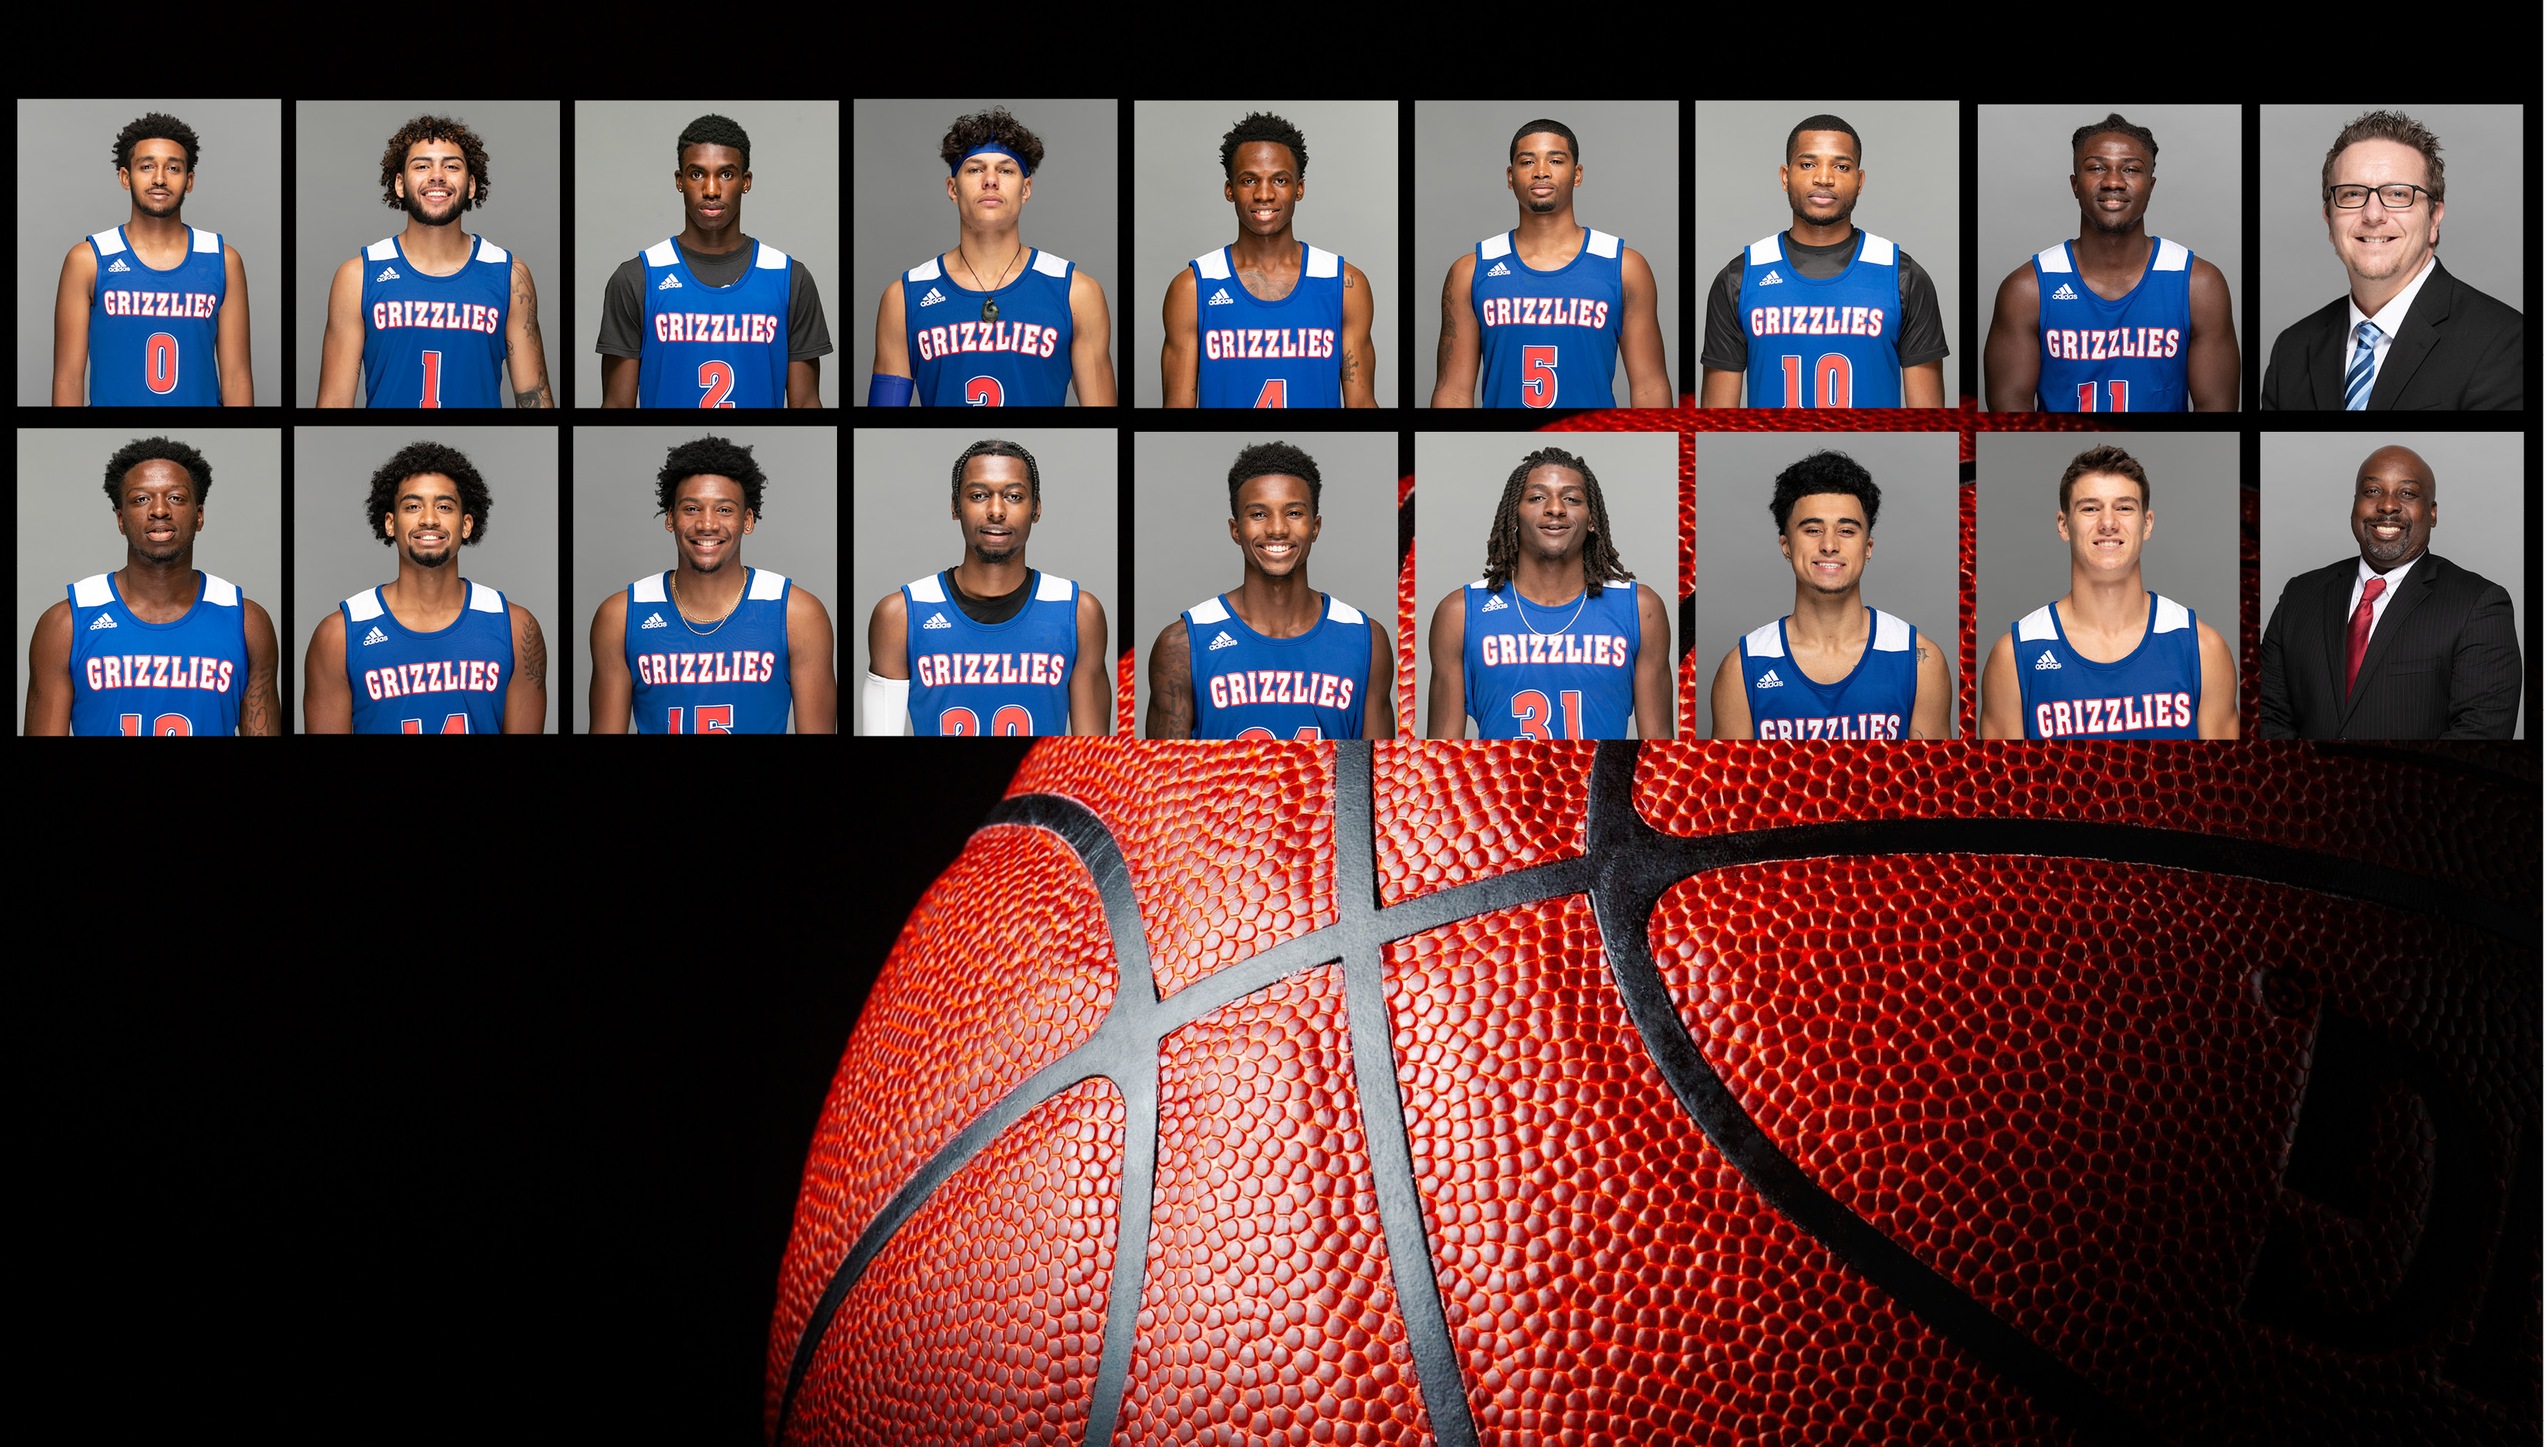 Graphic of full 2020 Grizzly Basketball Team